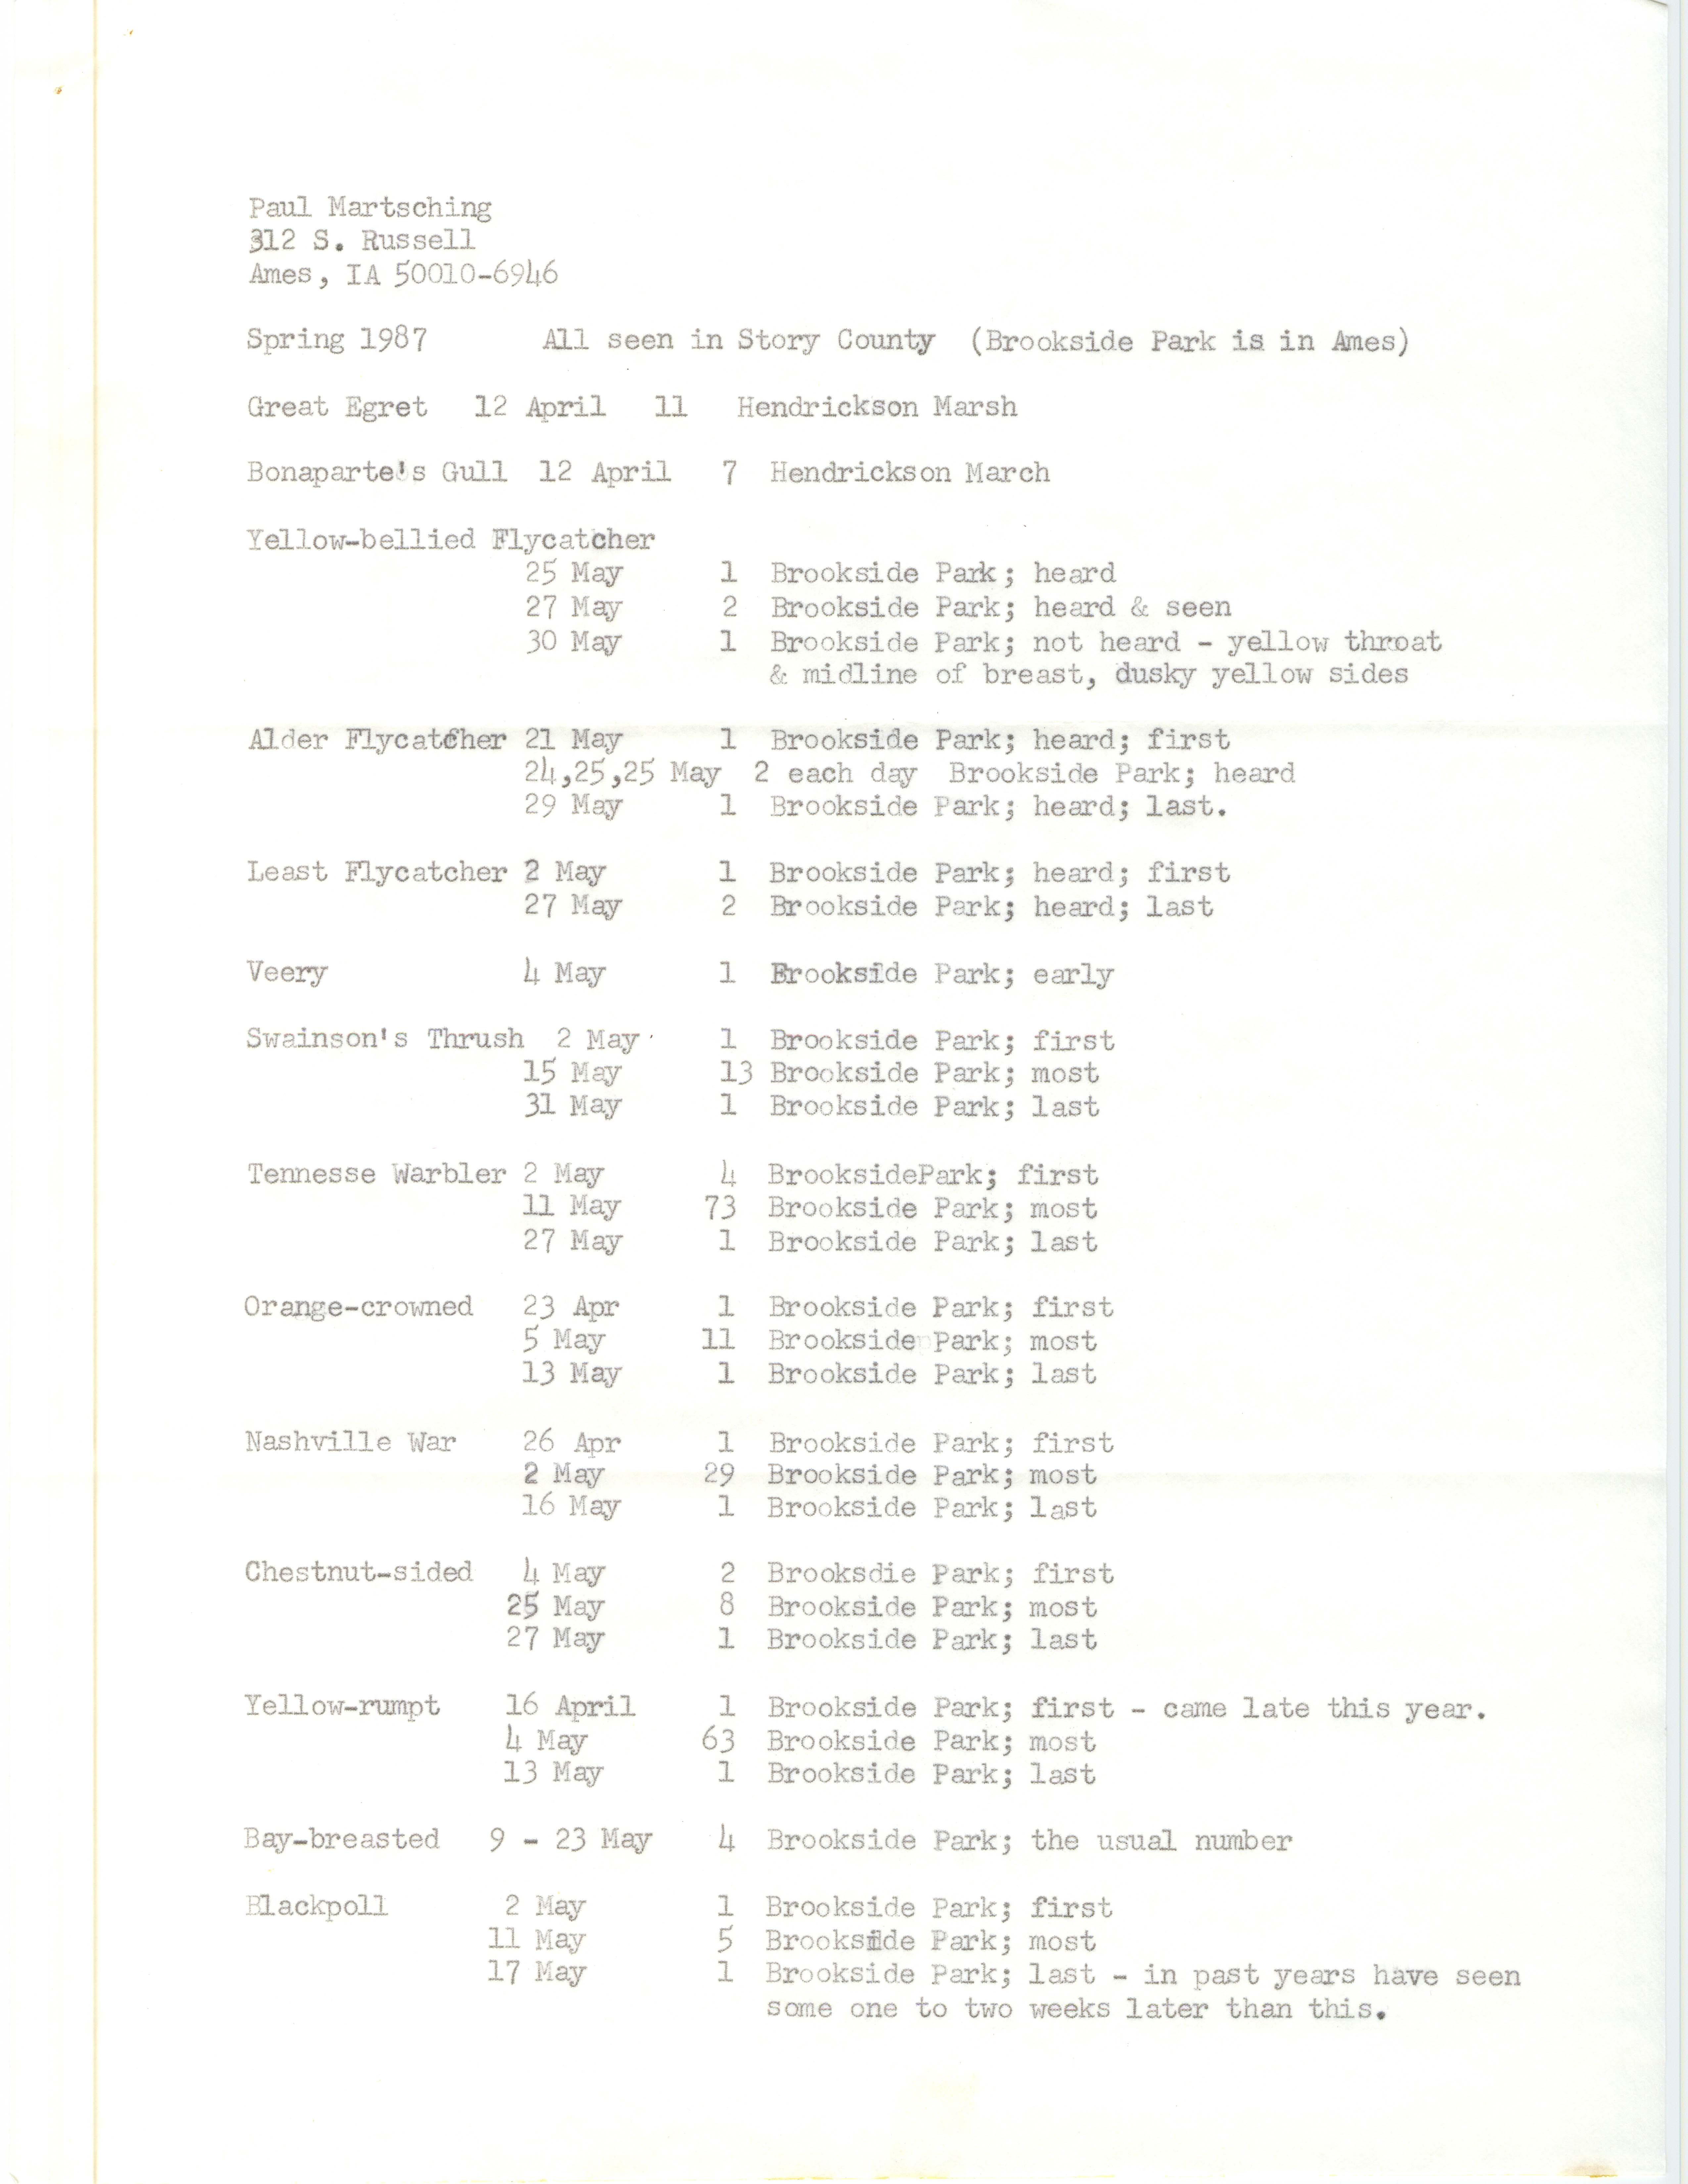 Field notes contributed by Paul Martsching, spring 1987